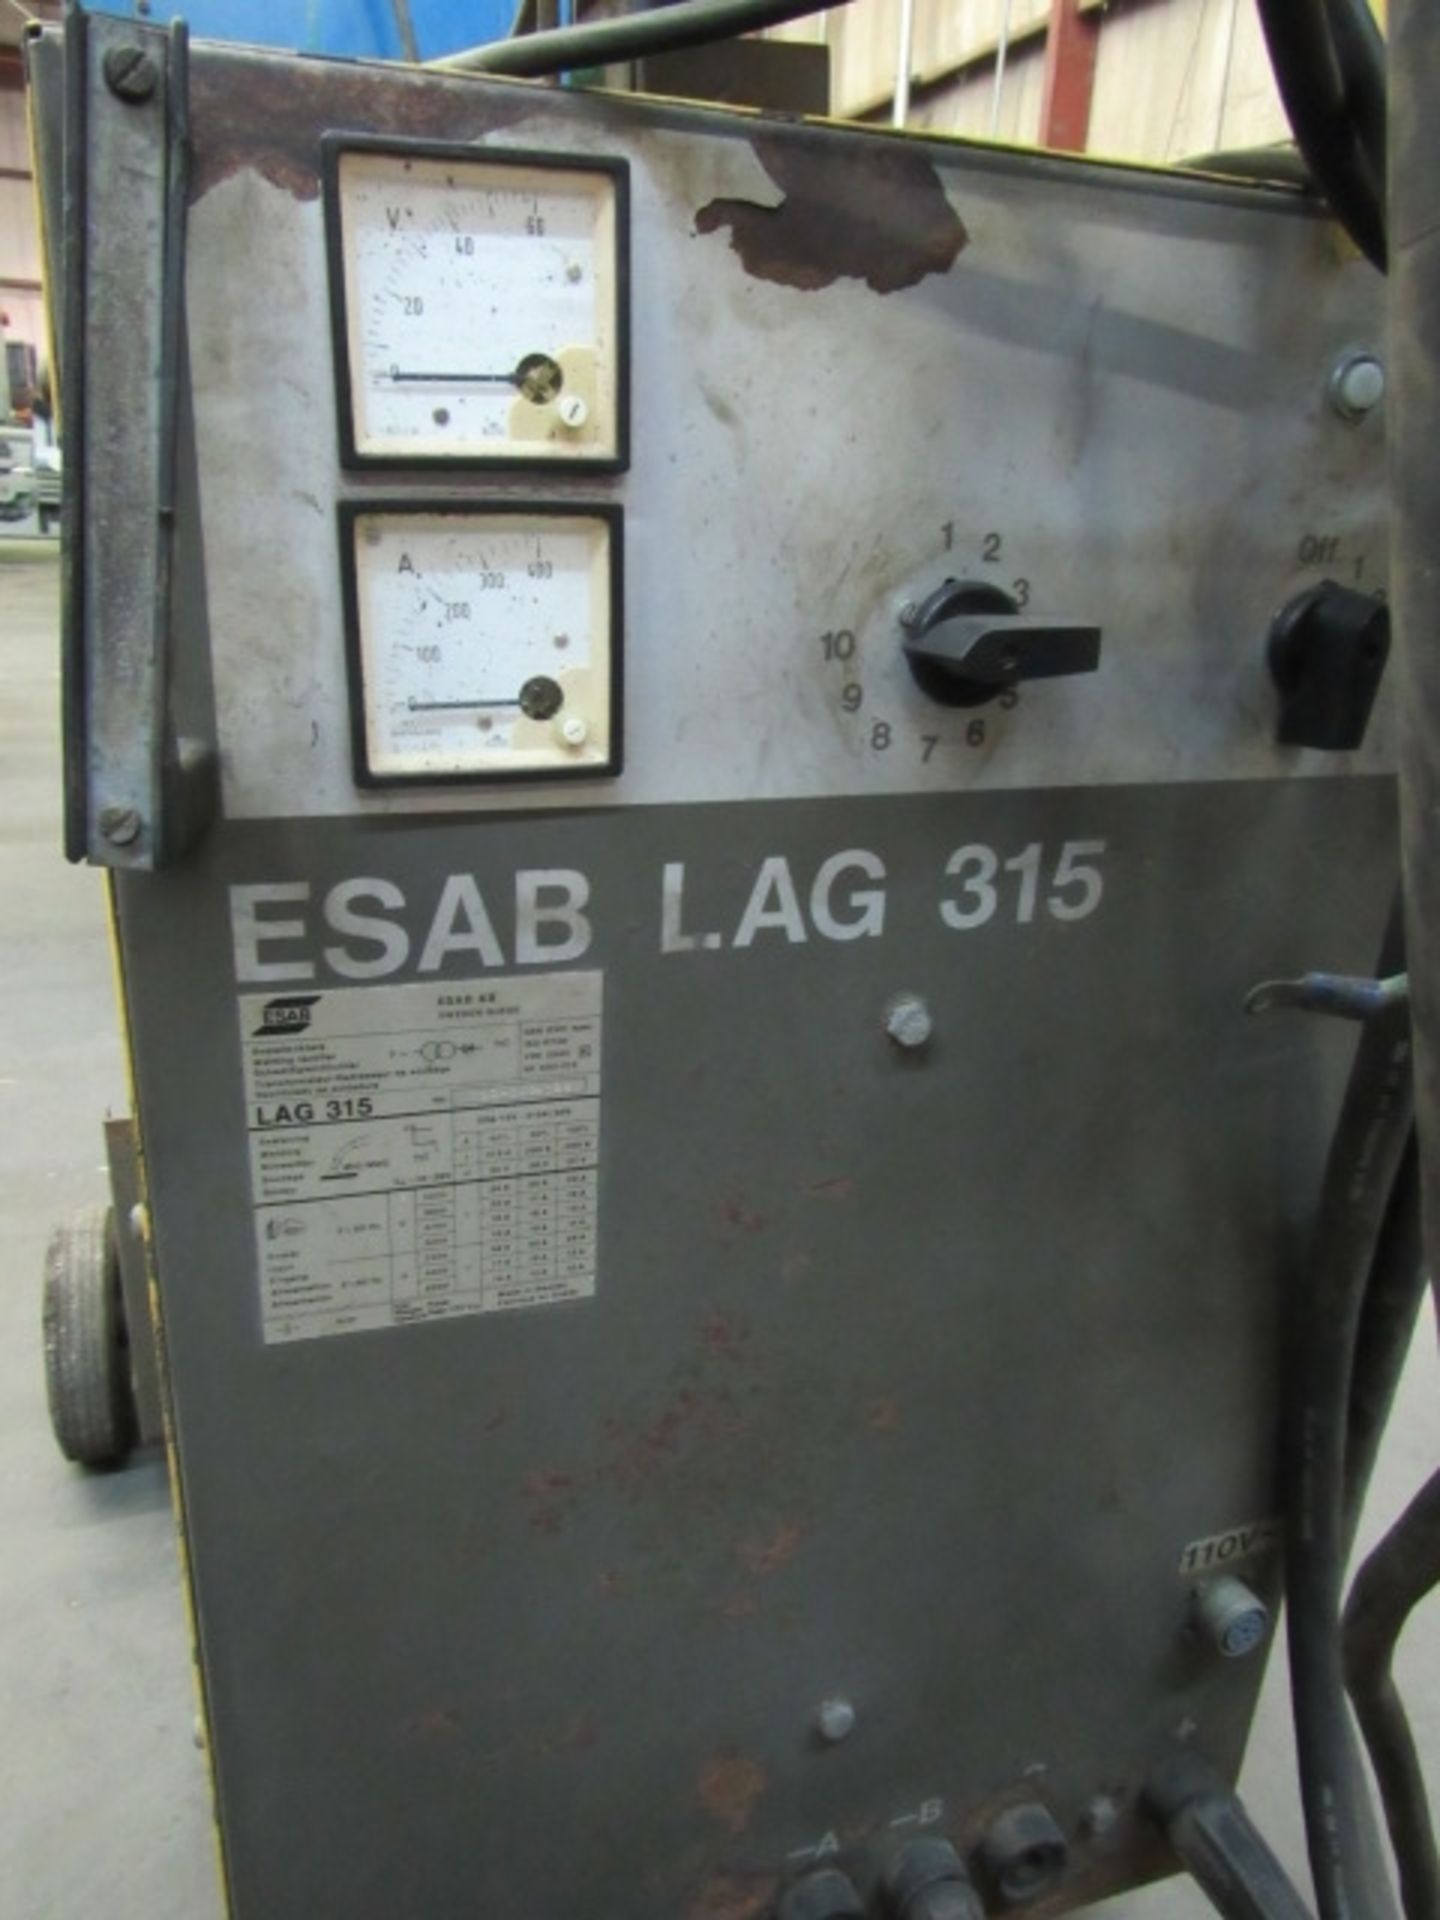 WIRE FEEDER, ESAB A/O MDL. A10-MVC30, 400 amps welding current, 60% max. duty factor, S/N 331-403- - Image 4 of 4